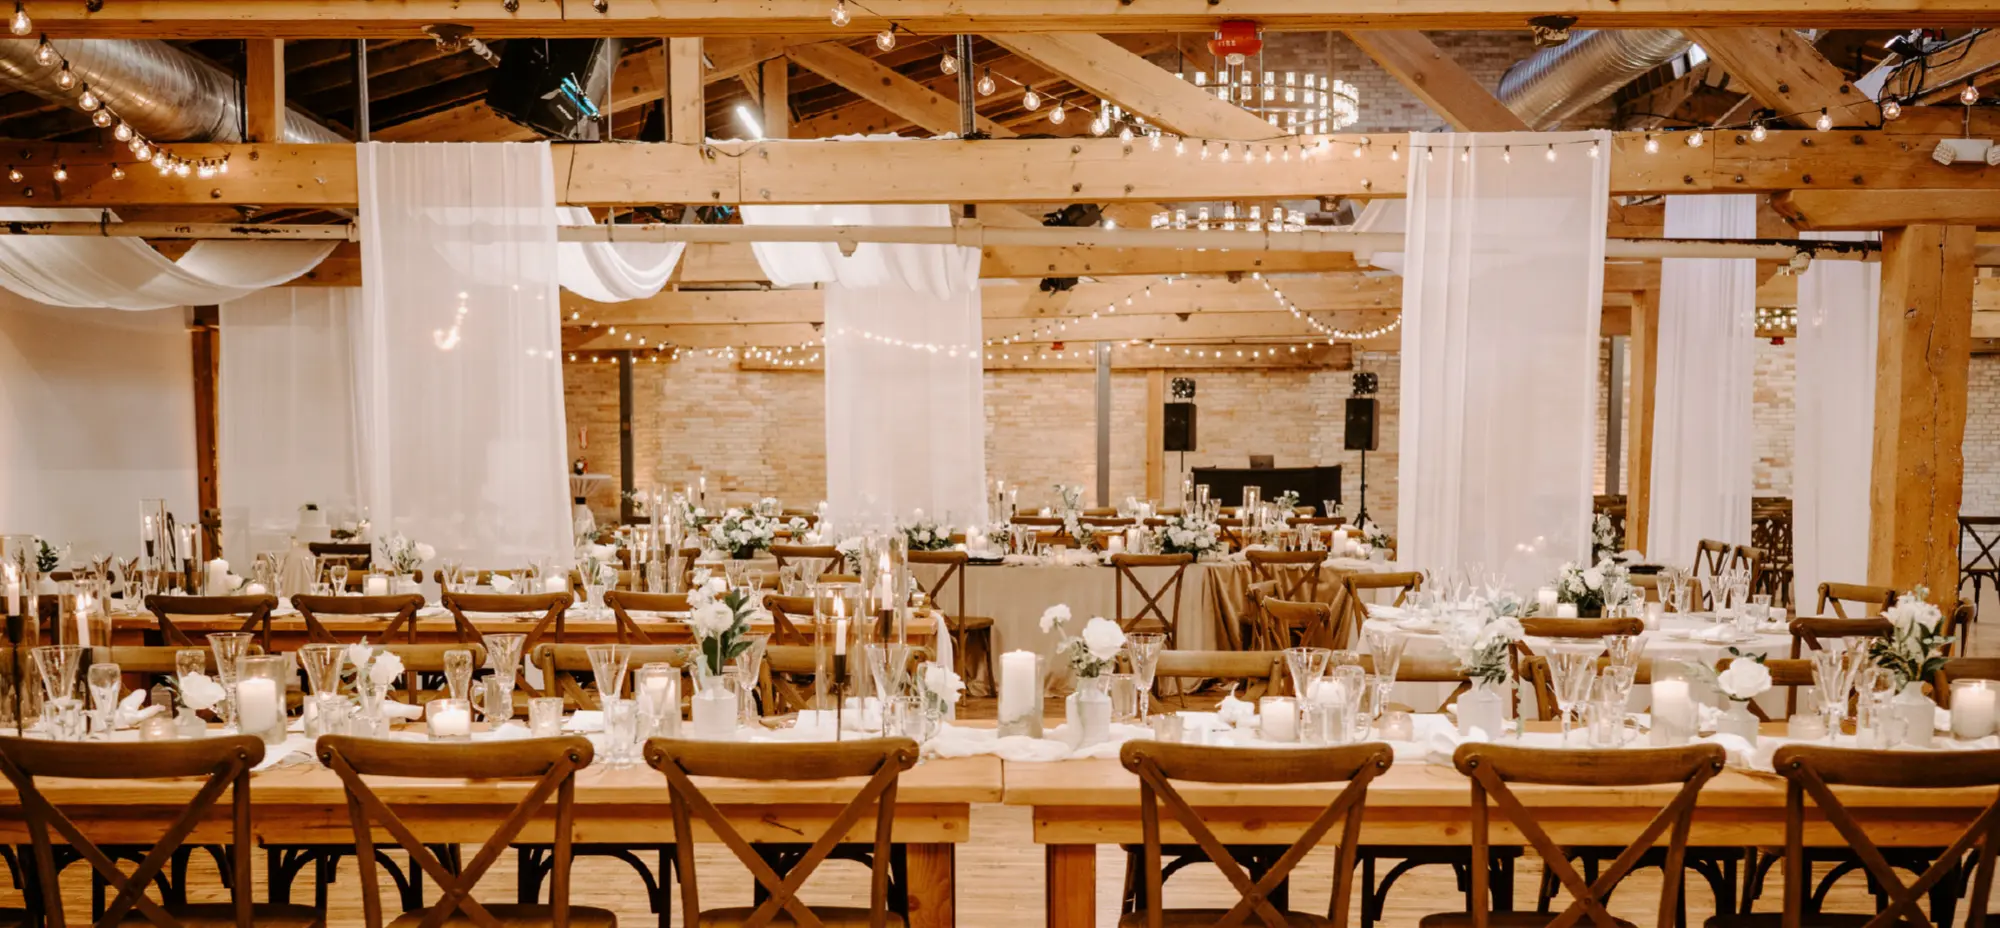 Large area filled with wooden tables and chairs, wedding drapes hung all over, and a DJ music setup station inside at The Goei Center venue